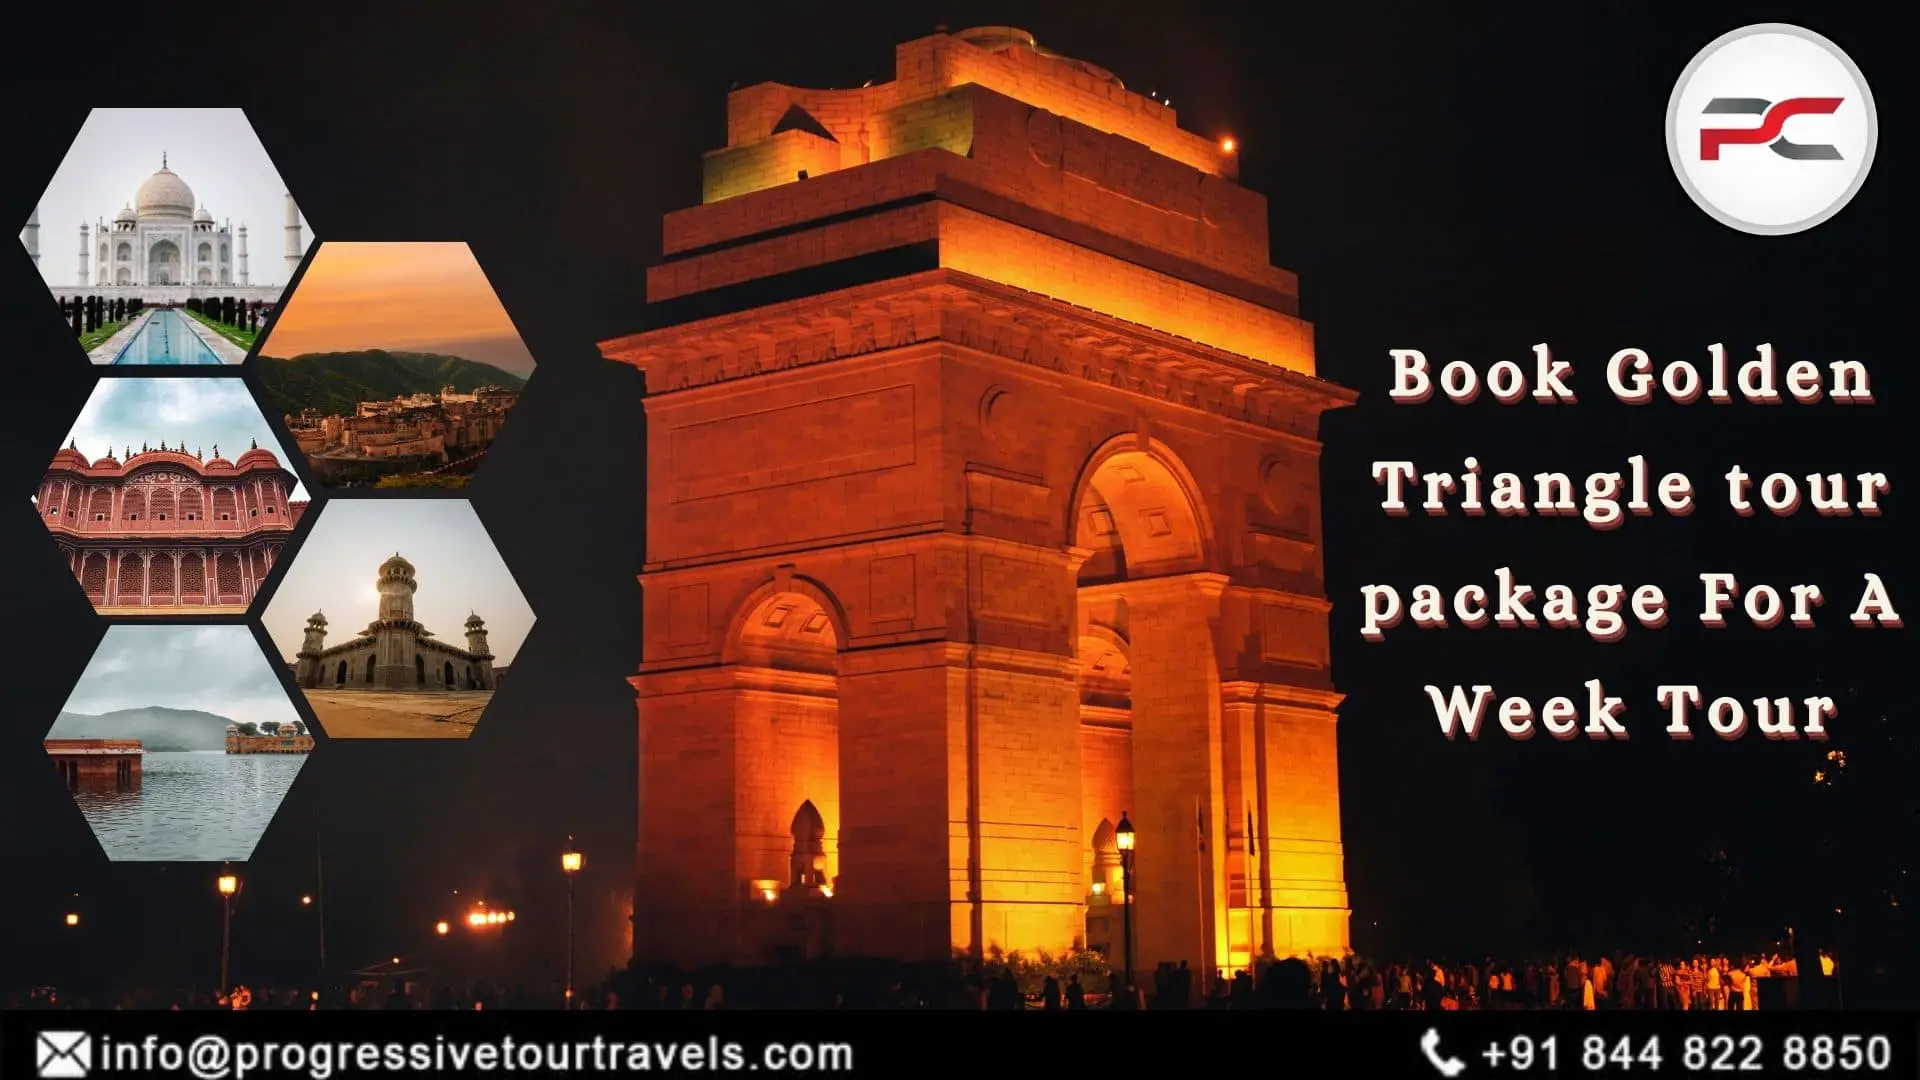 Book Golden Triangle tour package For A Week Tour-ad38bc30